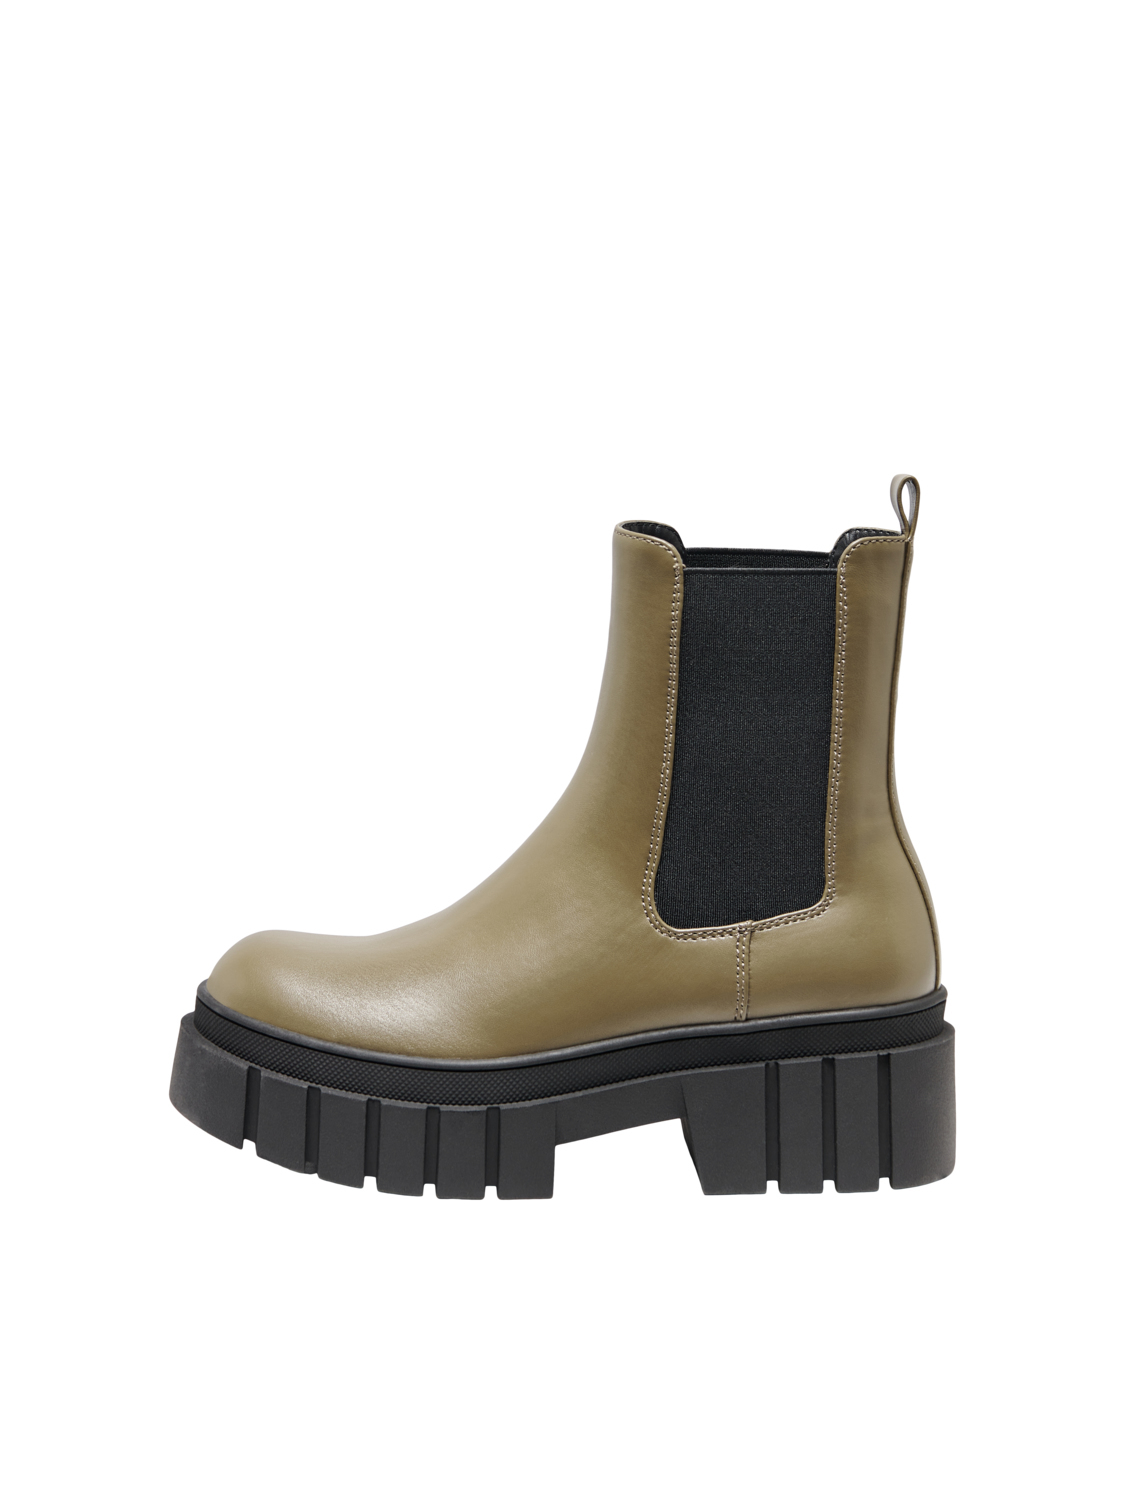 Baiza chunky-sole boots, GREEN OLIVE, large